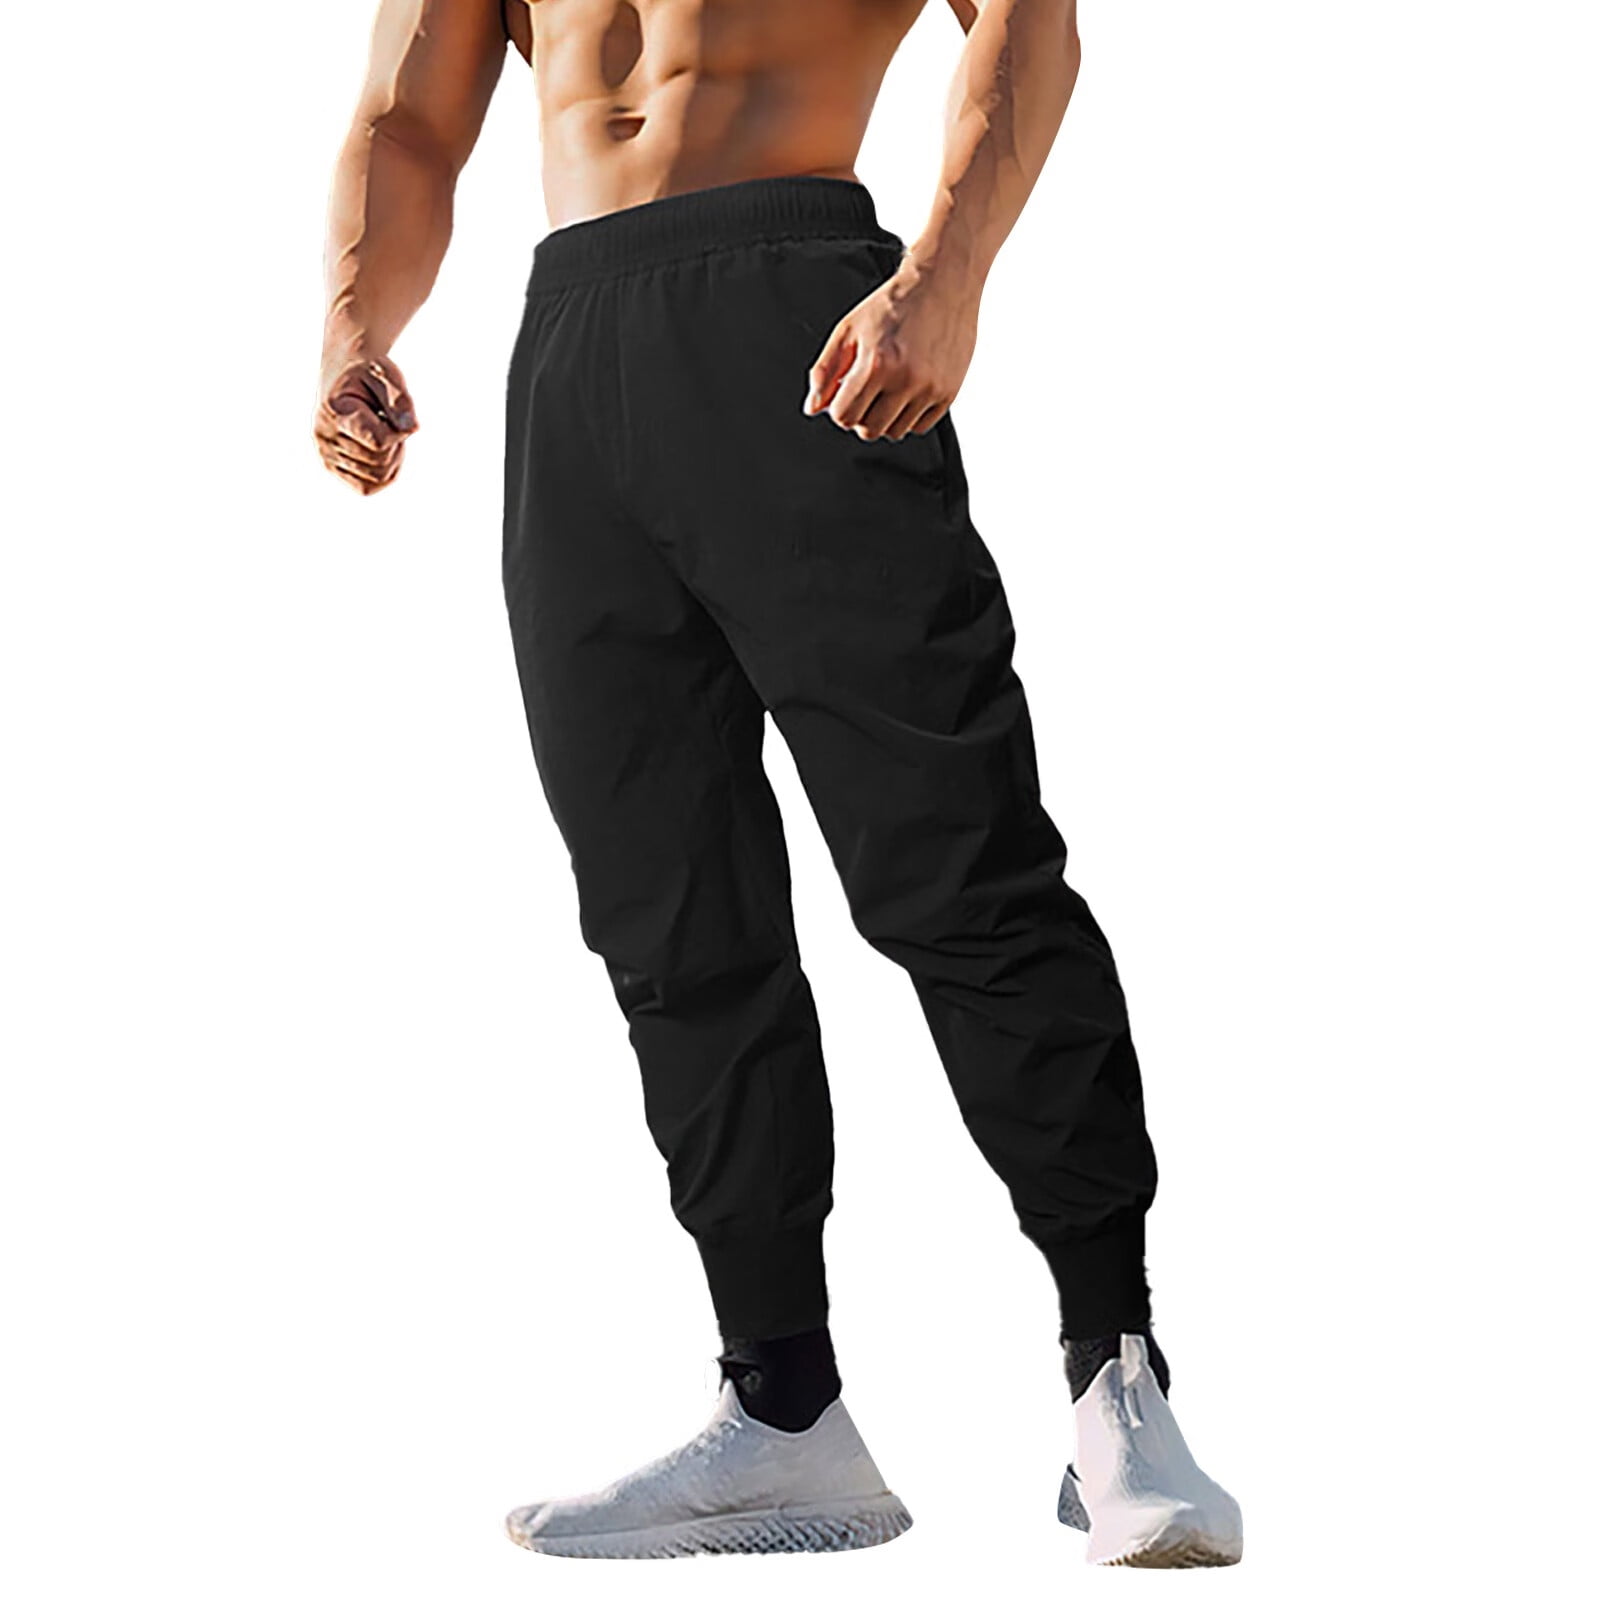 Mortilo baggy sweatpants for men,Solid Smooth Board Thin Quick